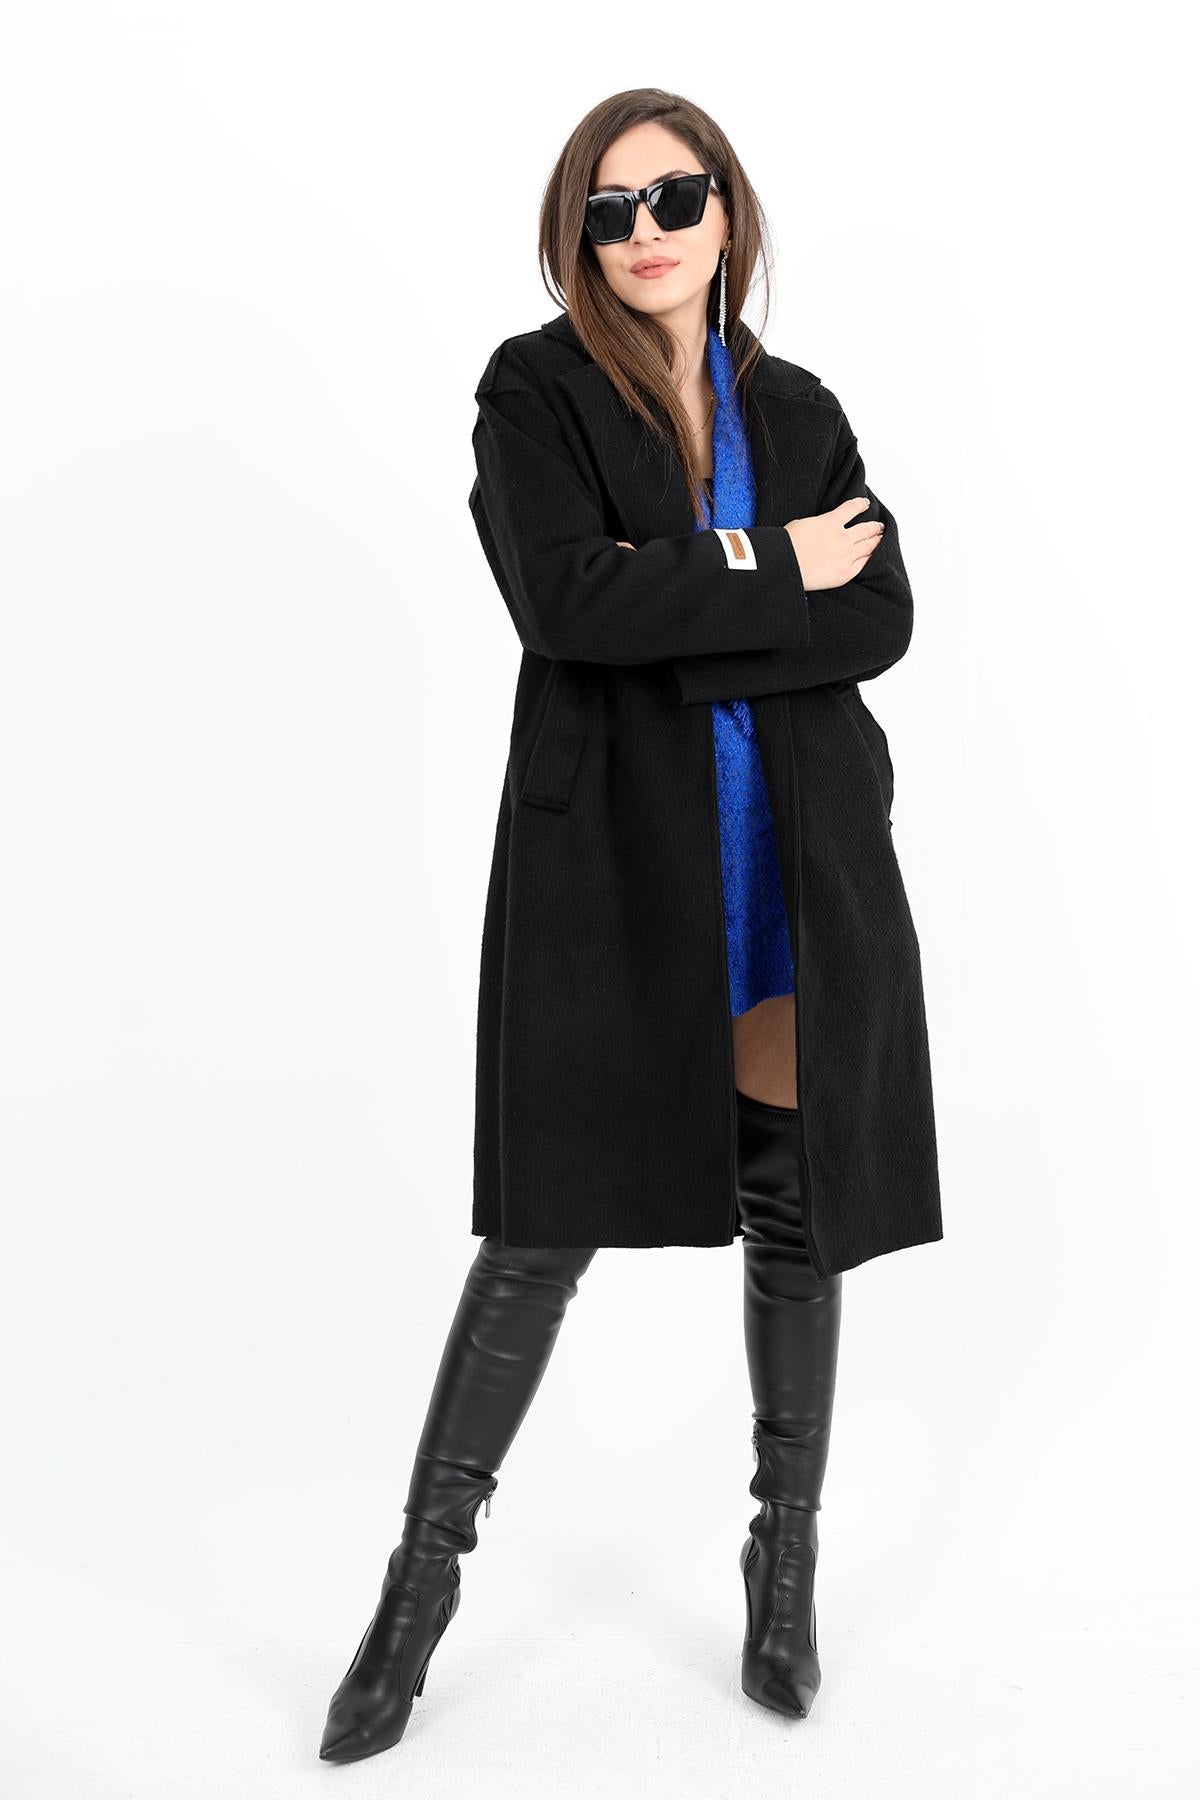 Women's Cashmere Coat Double-Breasted Collar Sleeve with Crest Detail - Black - STREETMODE ™